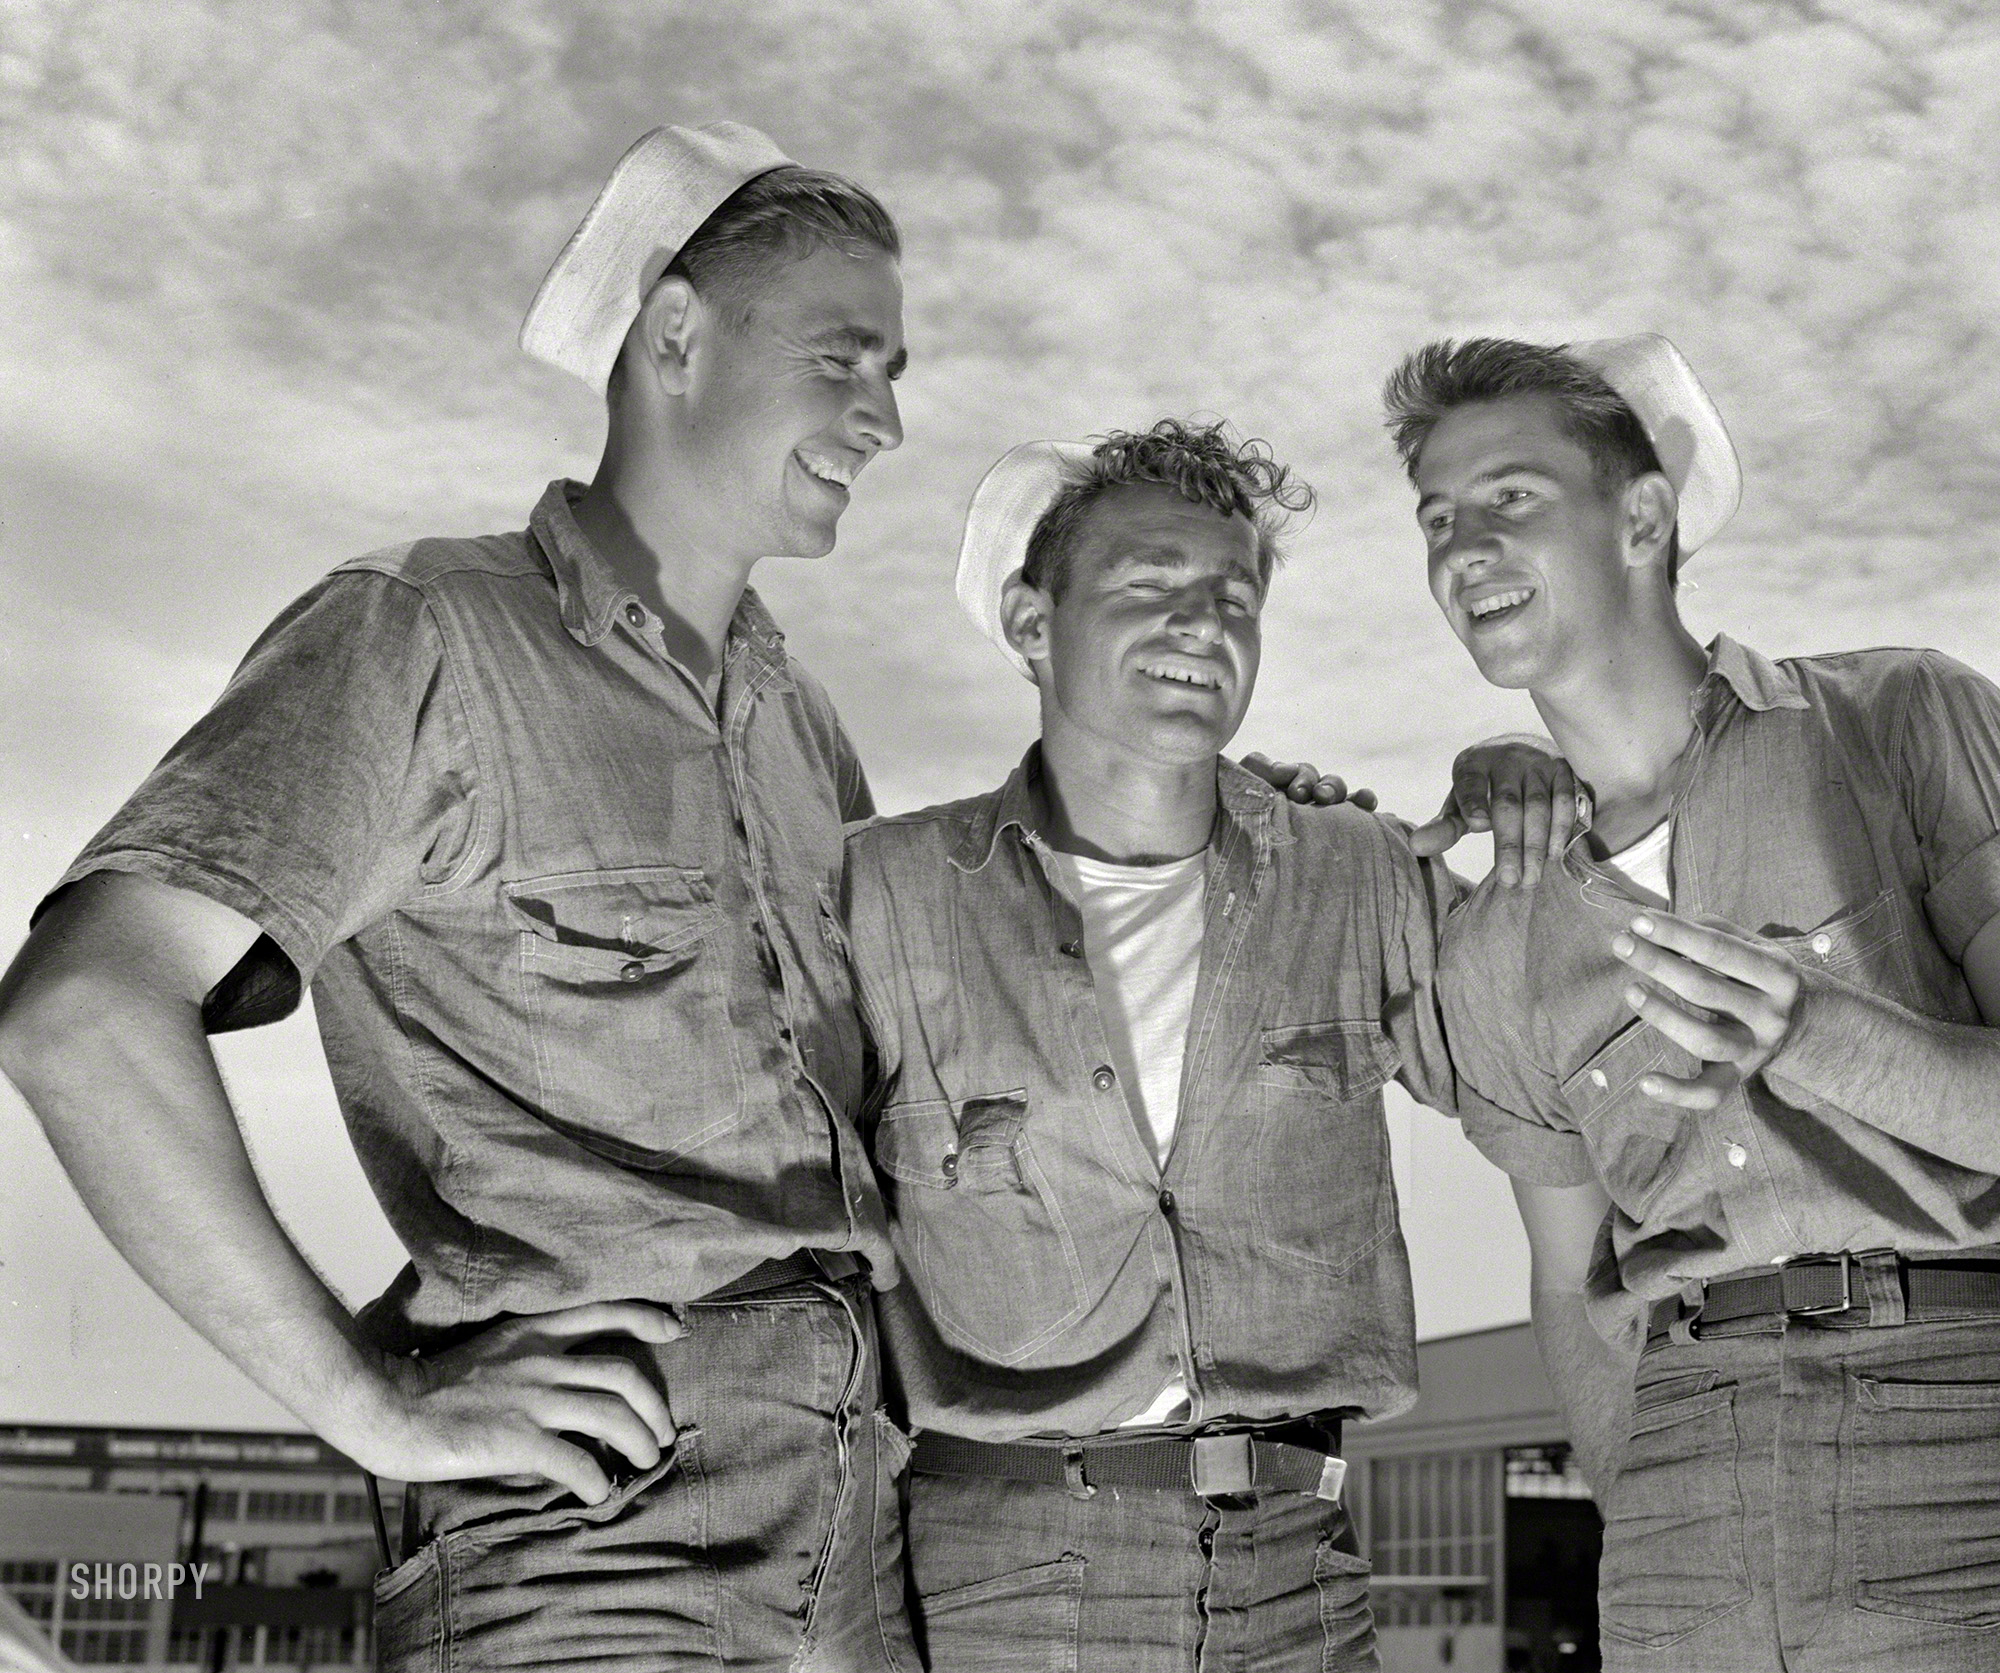 August 1942. "And so he says to me --  Sailor mechanics at the naval air base in Corpus Christi, Texas, laugh heartily over a good story between servicing operations on Navy planes." 4x5 inch nitrate negative by Howard Hollem for the Office of War Information. View full size.